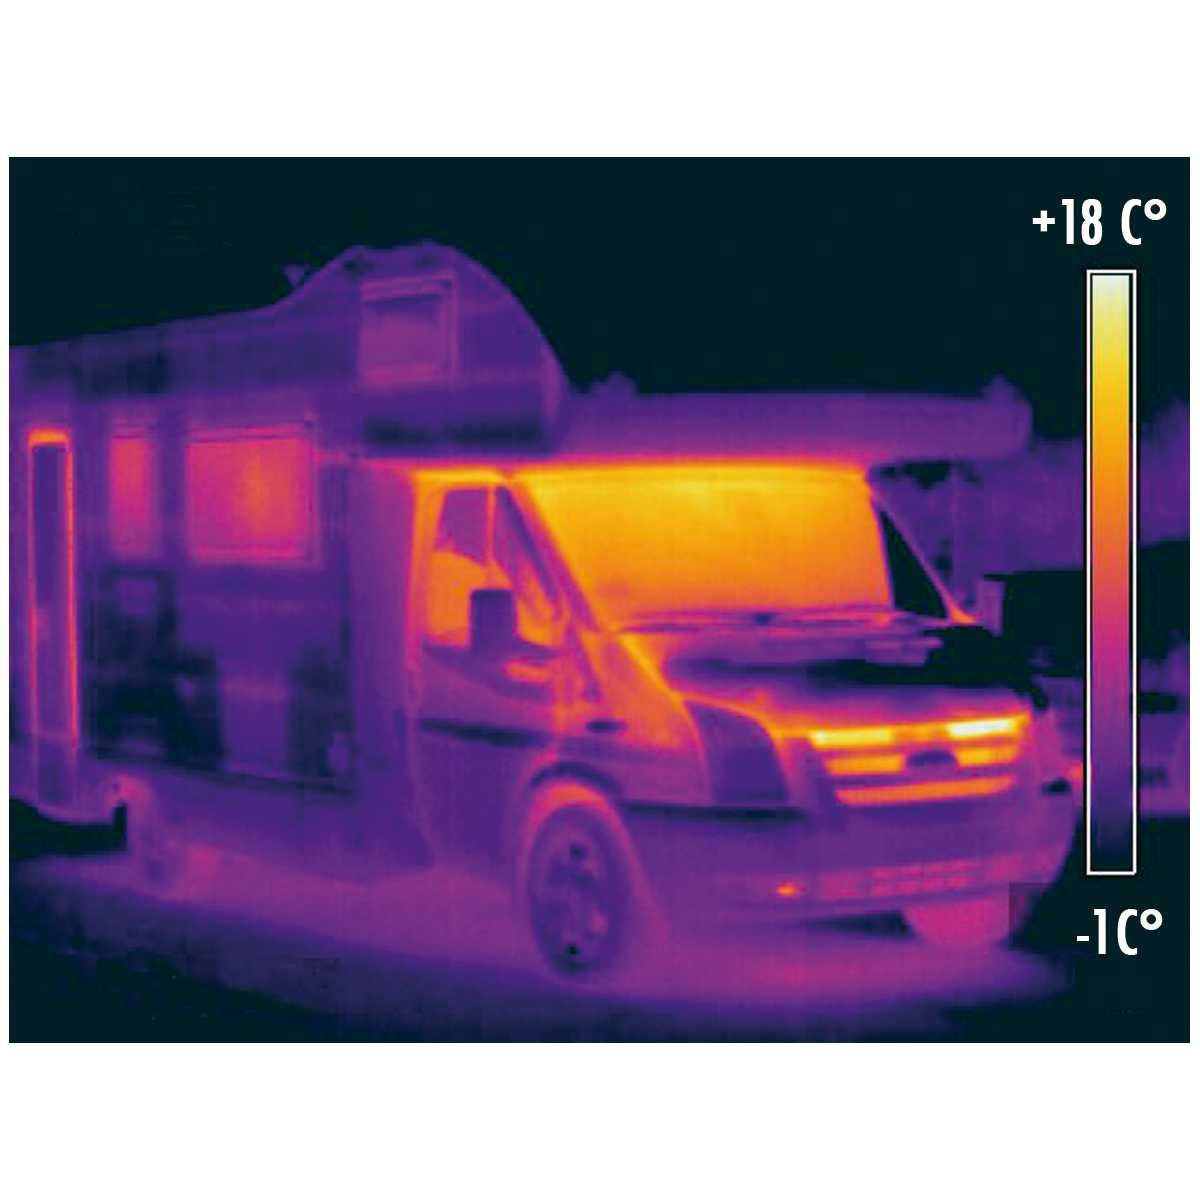 CLAIRVAL Thermofenstermatte THERMOVAL Standard Renault Trafic ab Bj- 06-2014 Art- Nr. LTRT15